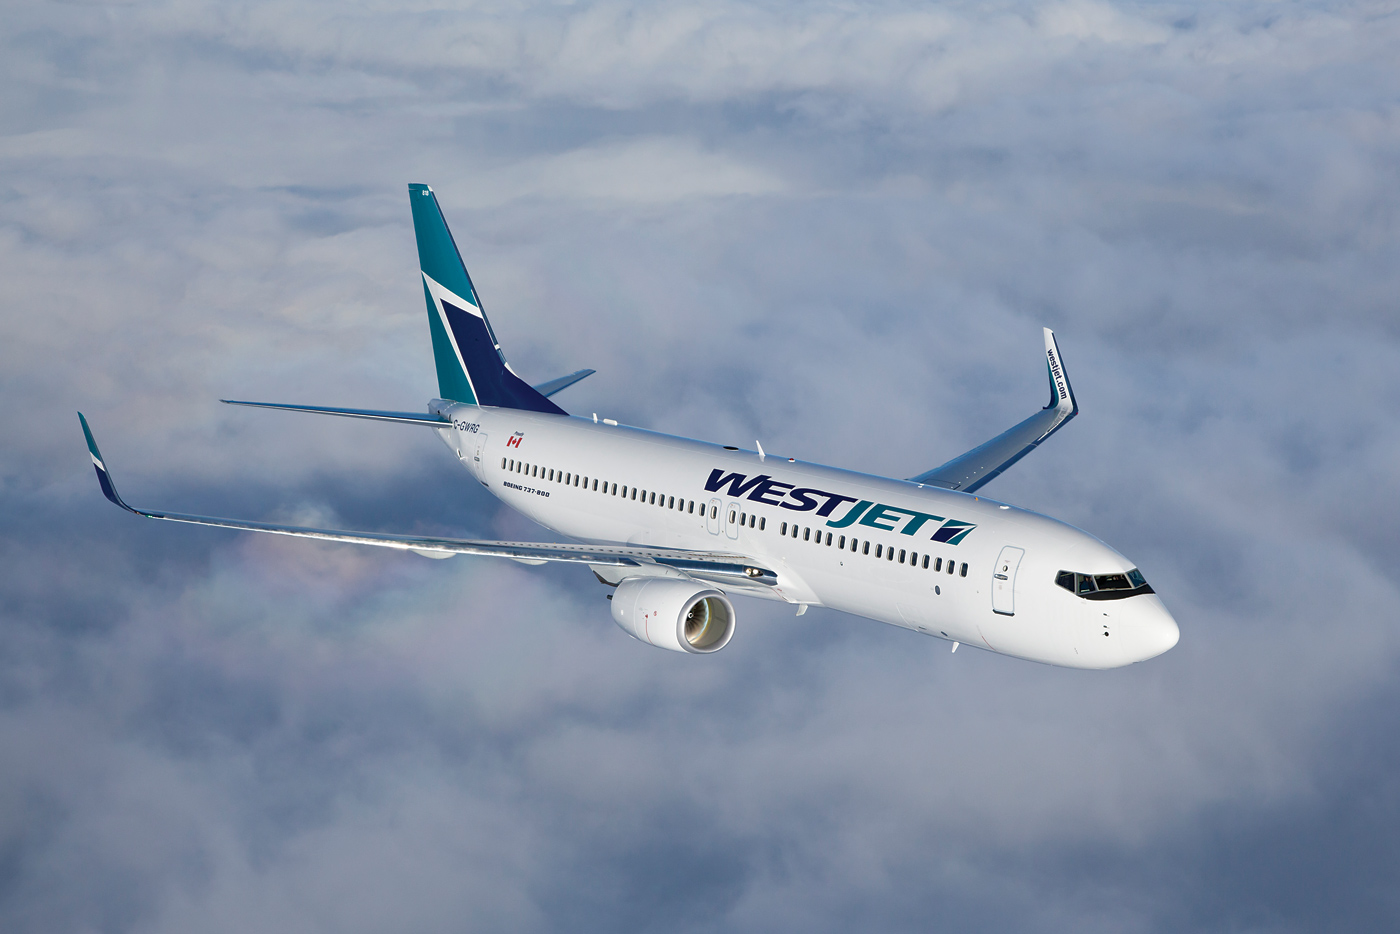 WestJet’s new ultra-low-cost carrier will be branded separately from the main airline and crew will wear different uniforms. The new service will initially field a fleet of 10 Boeing 737-800 aircraft, shown here in mainline WestJet livery. WestJet Photo